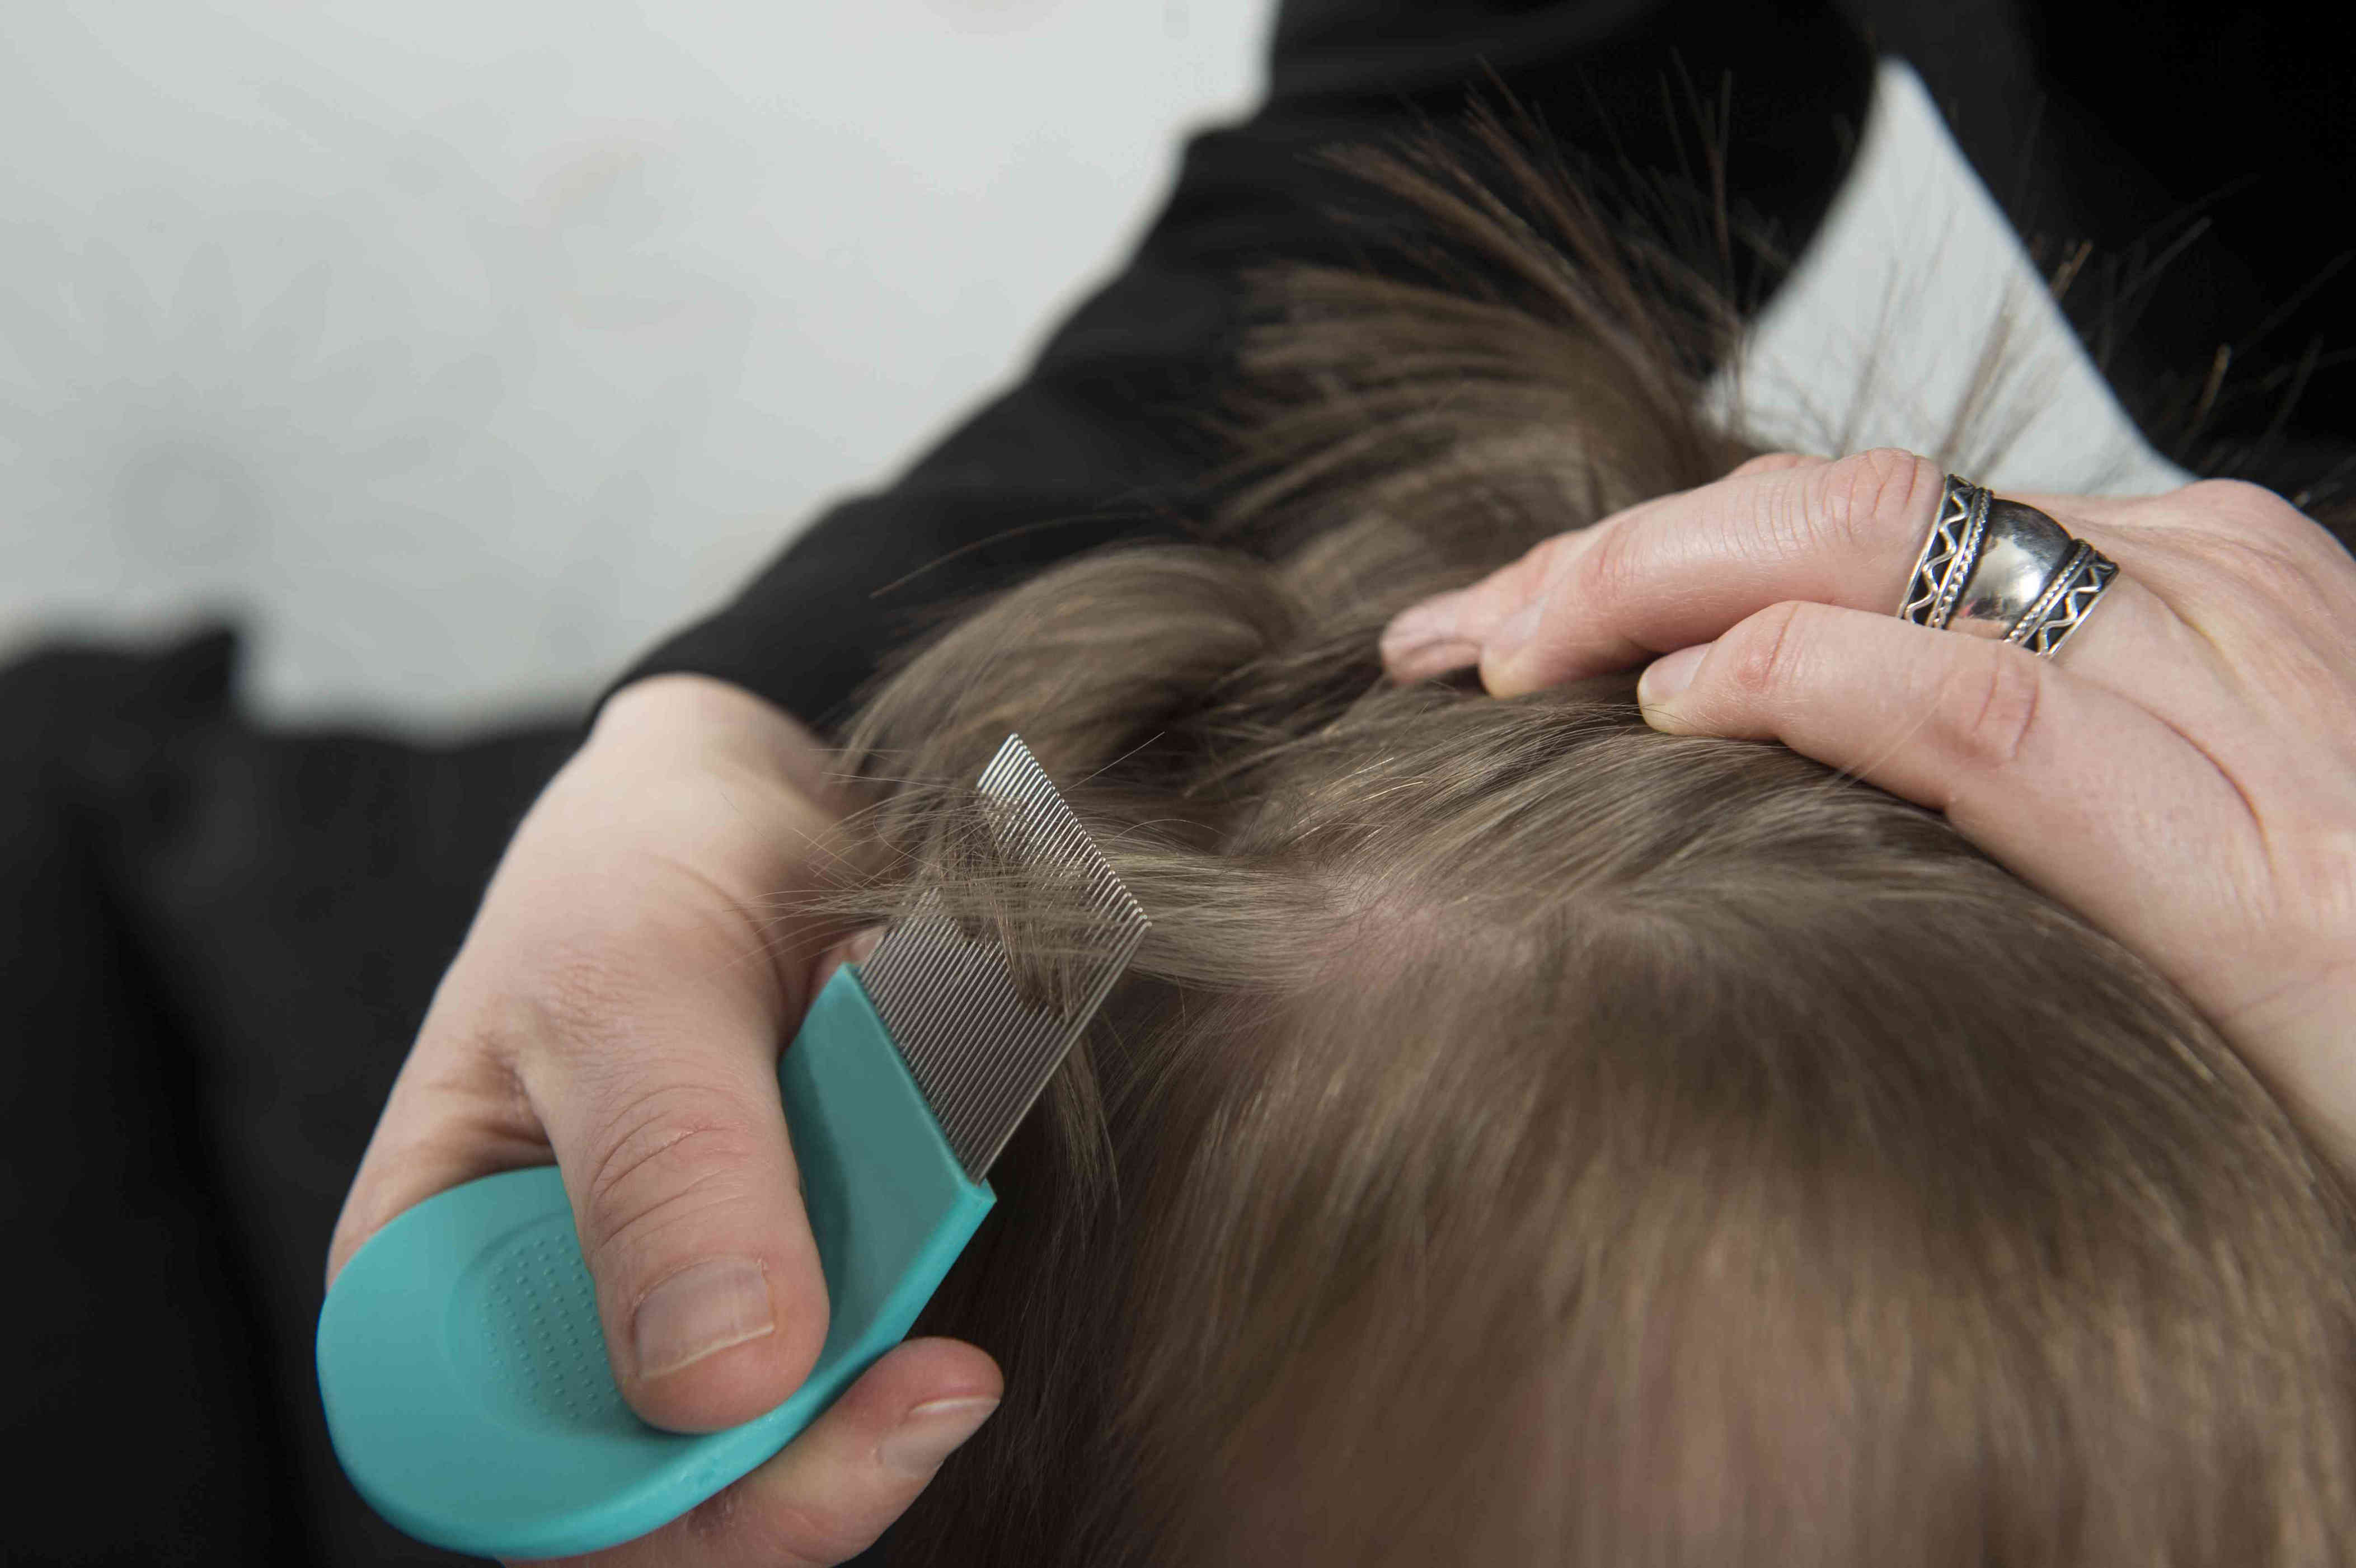 How Is Lice Treated?